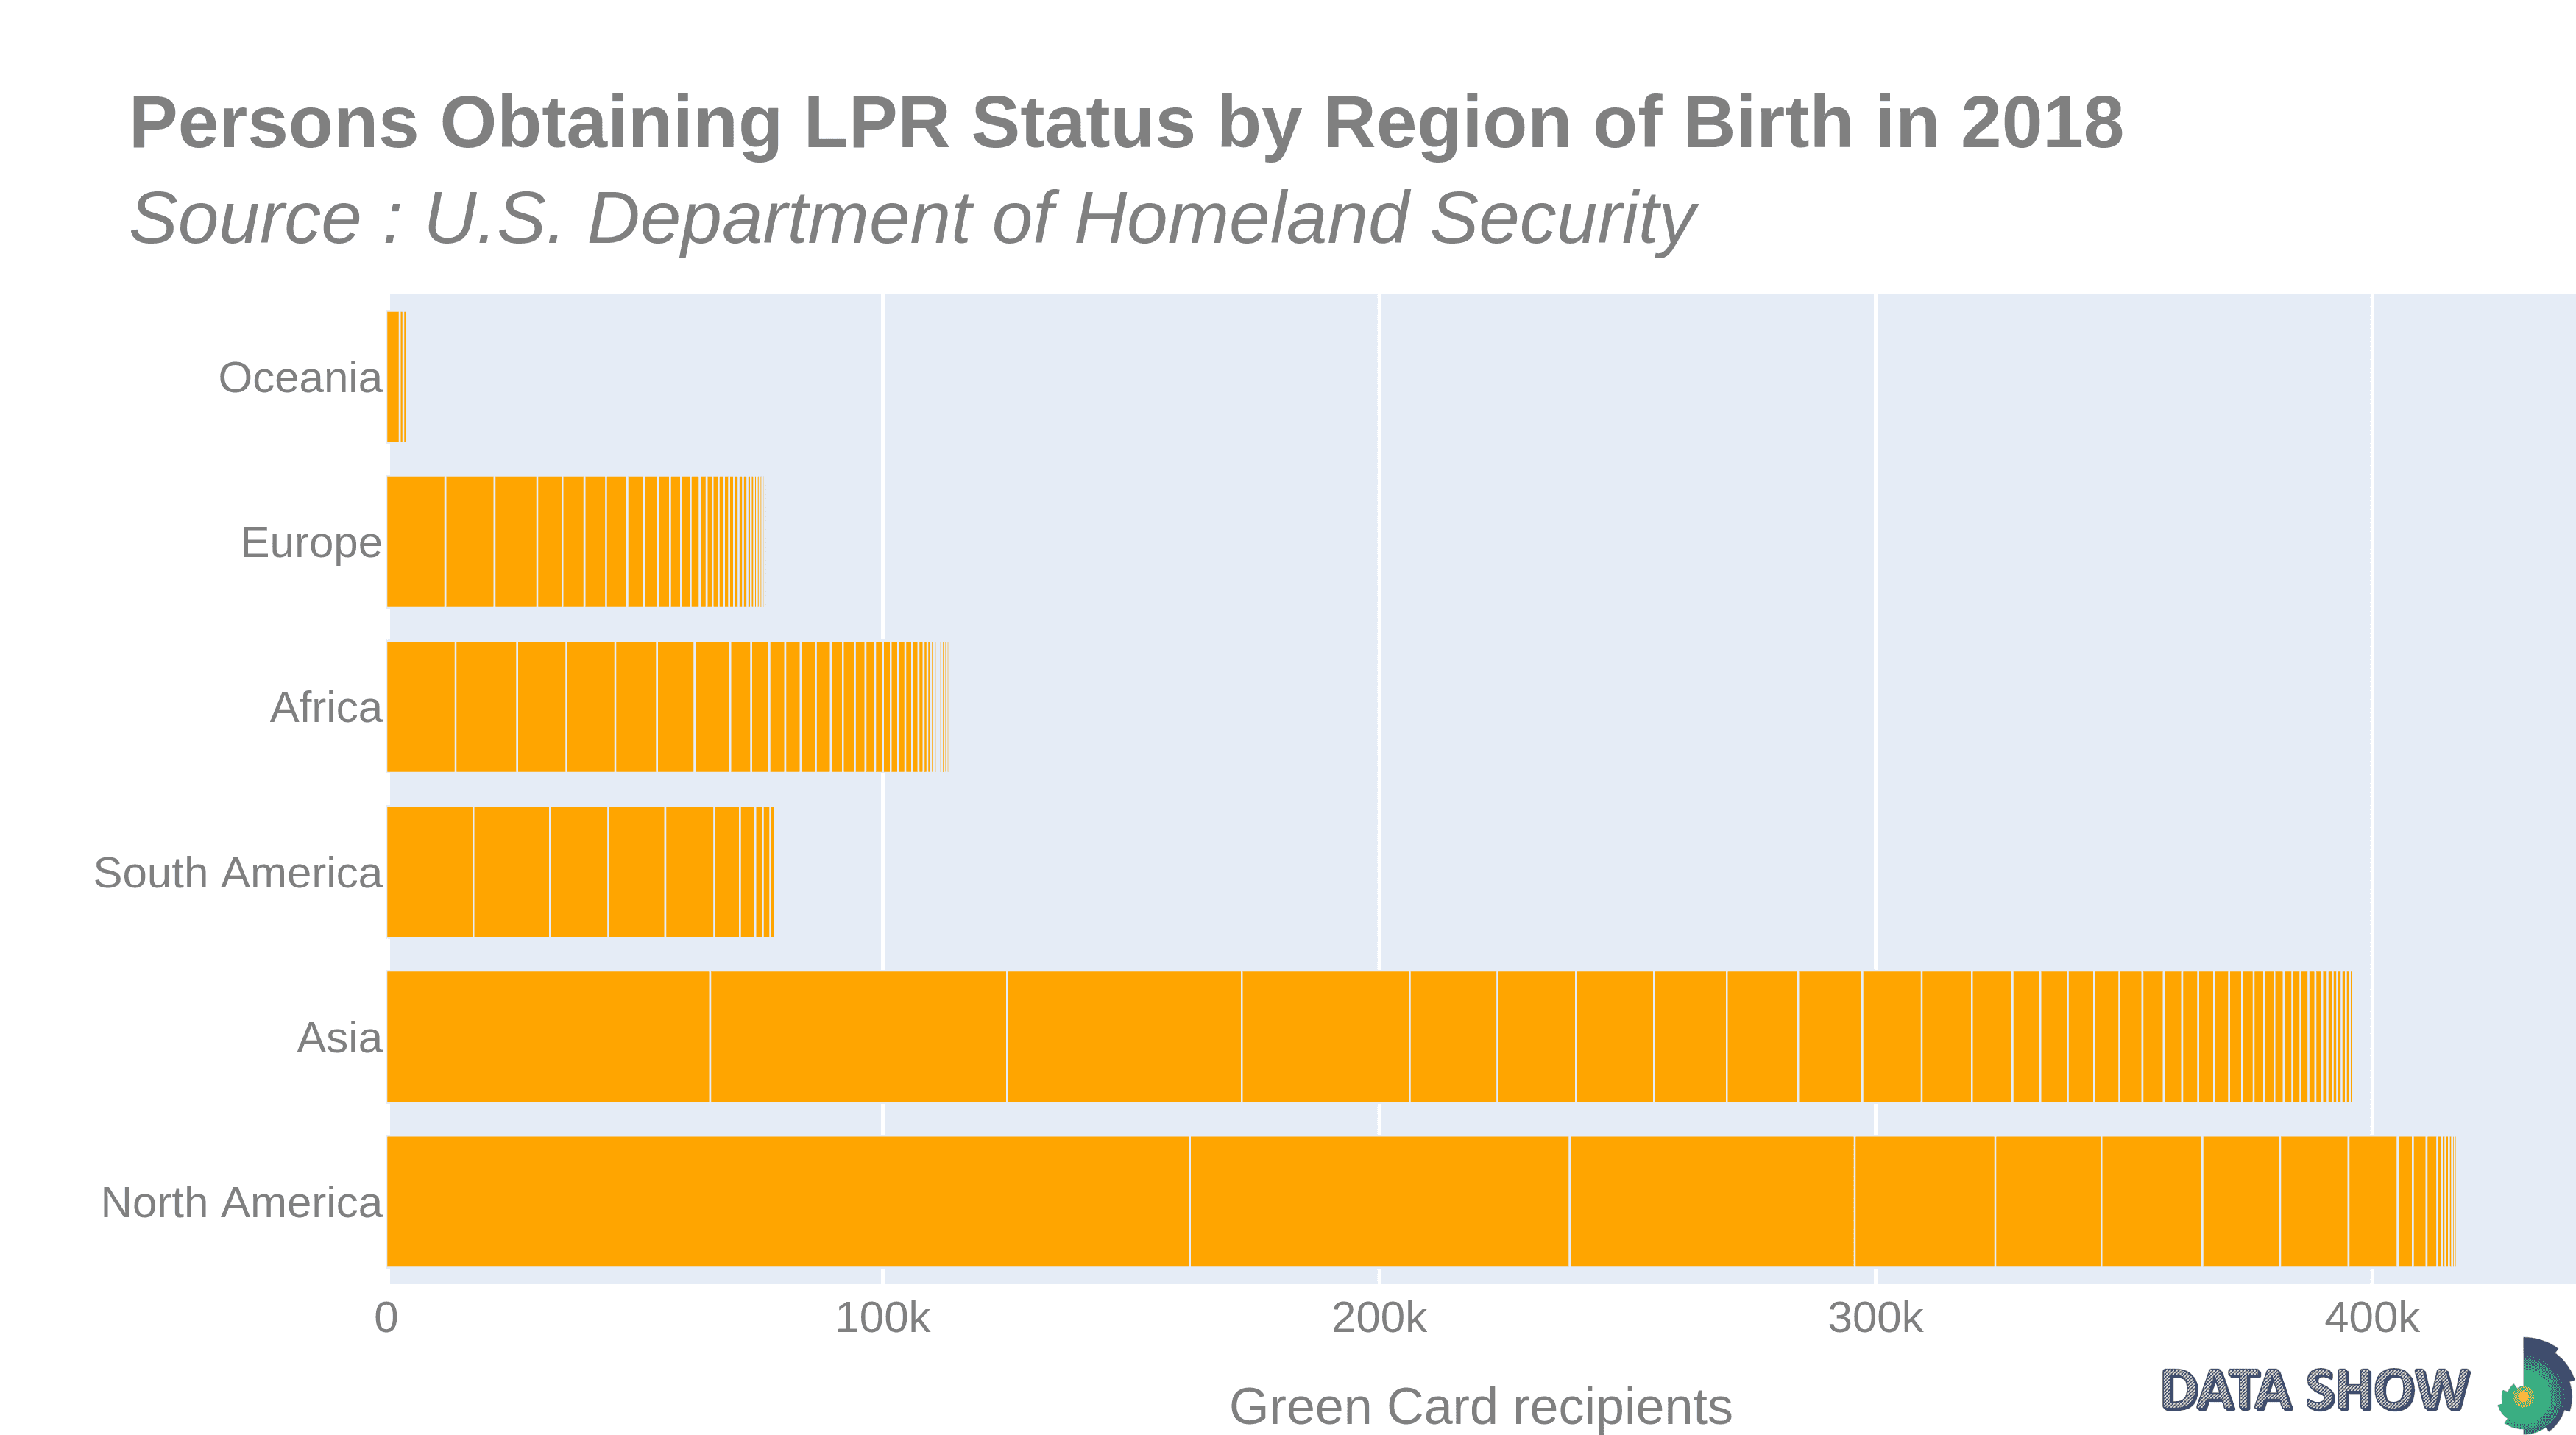 Persons Obtaining Lawful Permanent Resident Status by Region and Country of Birth in 2018 - Graph